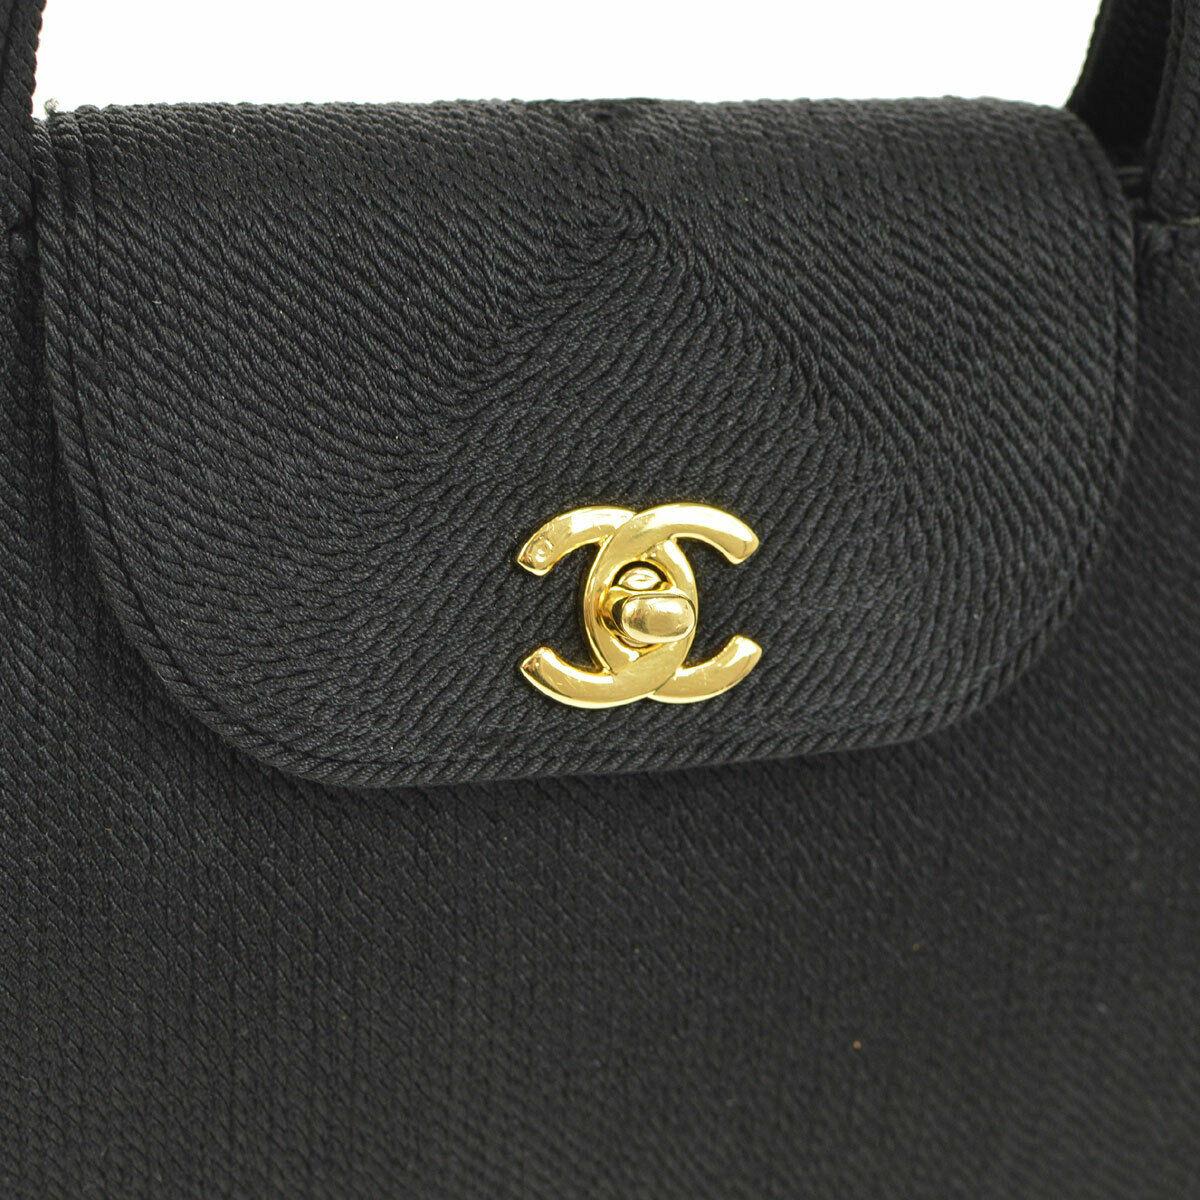 Chanel Black Braided Knit Top Handle Satchel Kelly Style Evening Flap Bag in Box

Knit
Leather lining 
Gold tone hardware
Turnlock closure
Made in Italy
Date code present
Handle drop 3